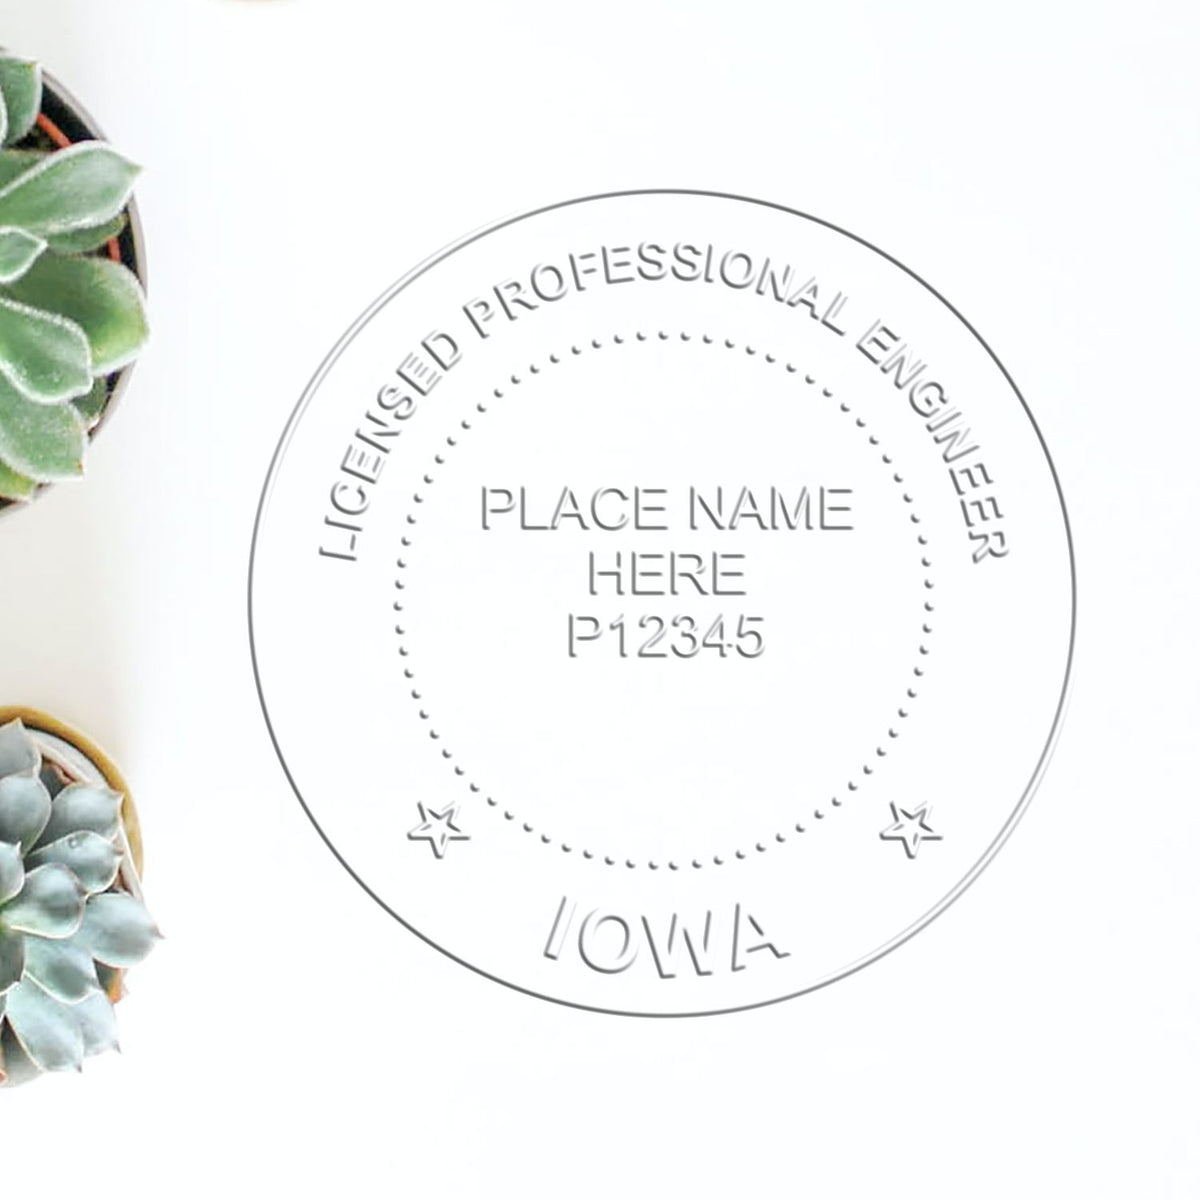 The Gift Iowa Engineer Seal stamp impression comes to life with a crisp, detailed image stamped on paper - showcasing true professional quality.